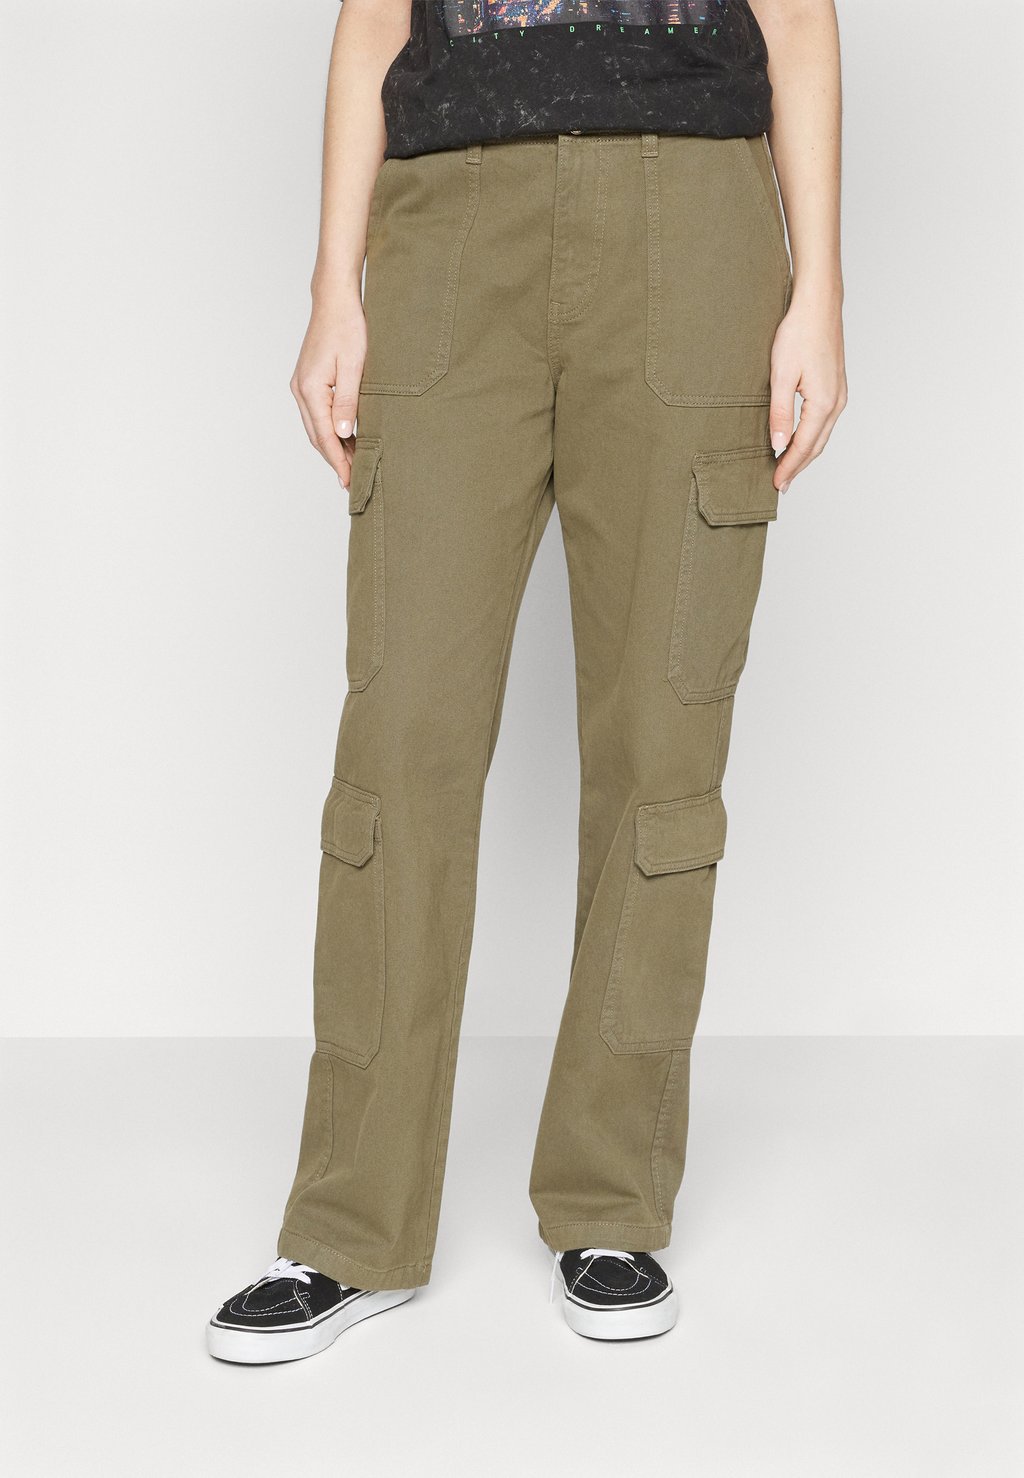 Брюки карго ONLMALFY PANT ONLY, цвет kalamata брюки onlebba pant only цвет lychee